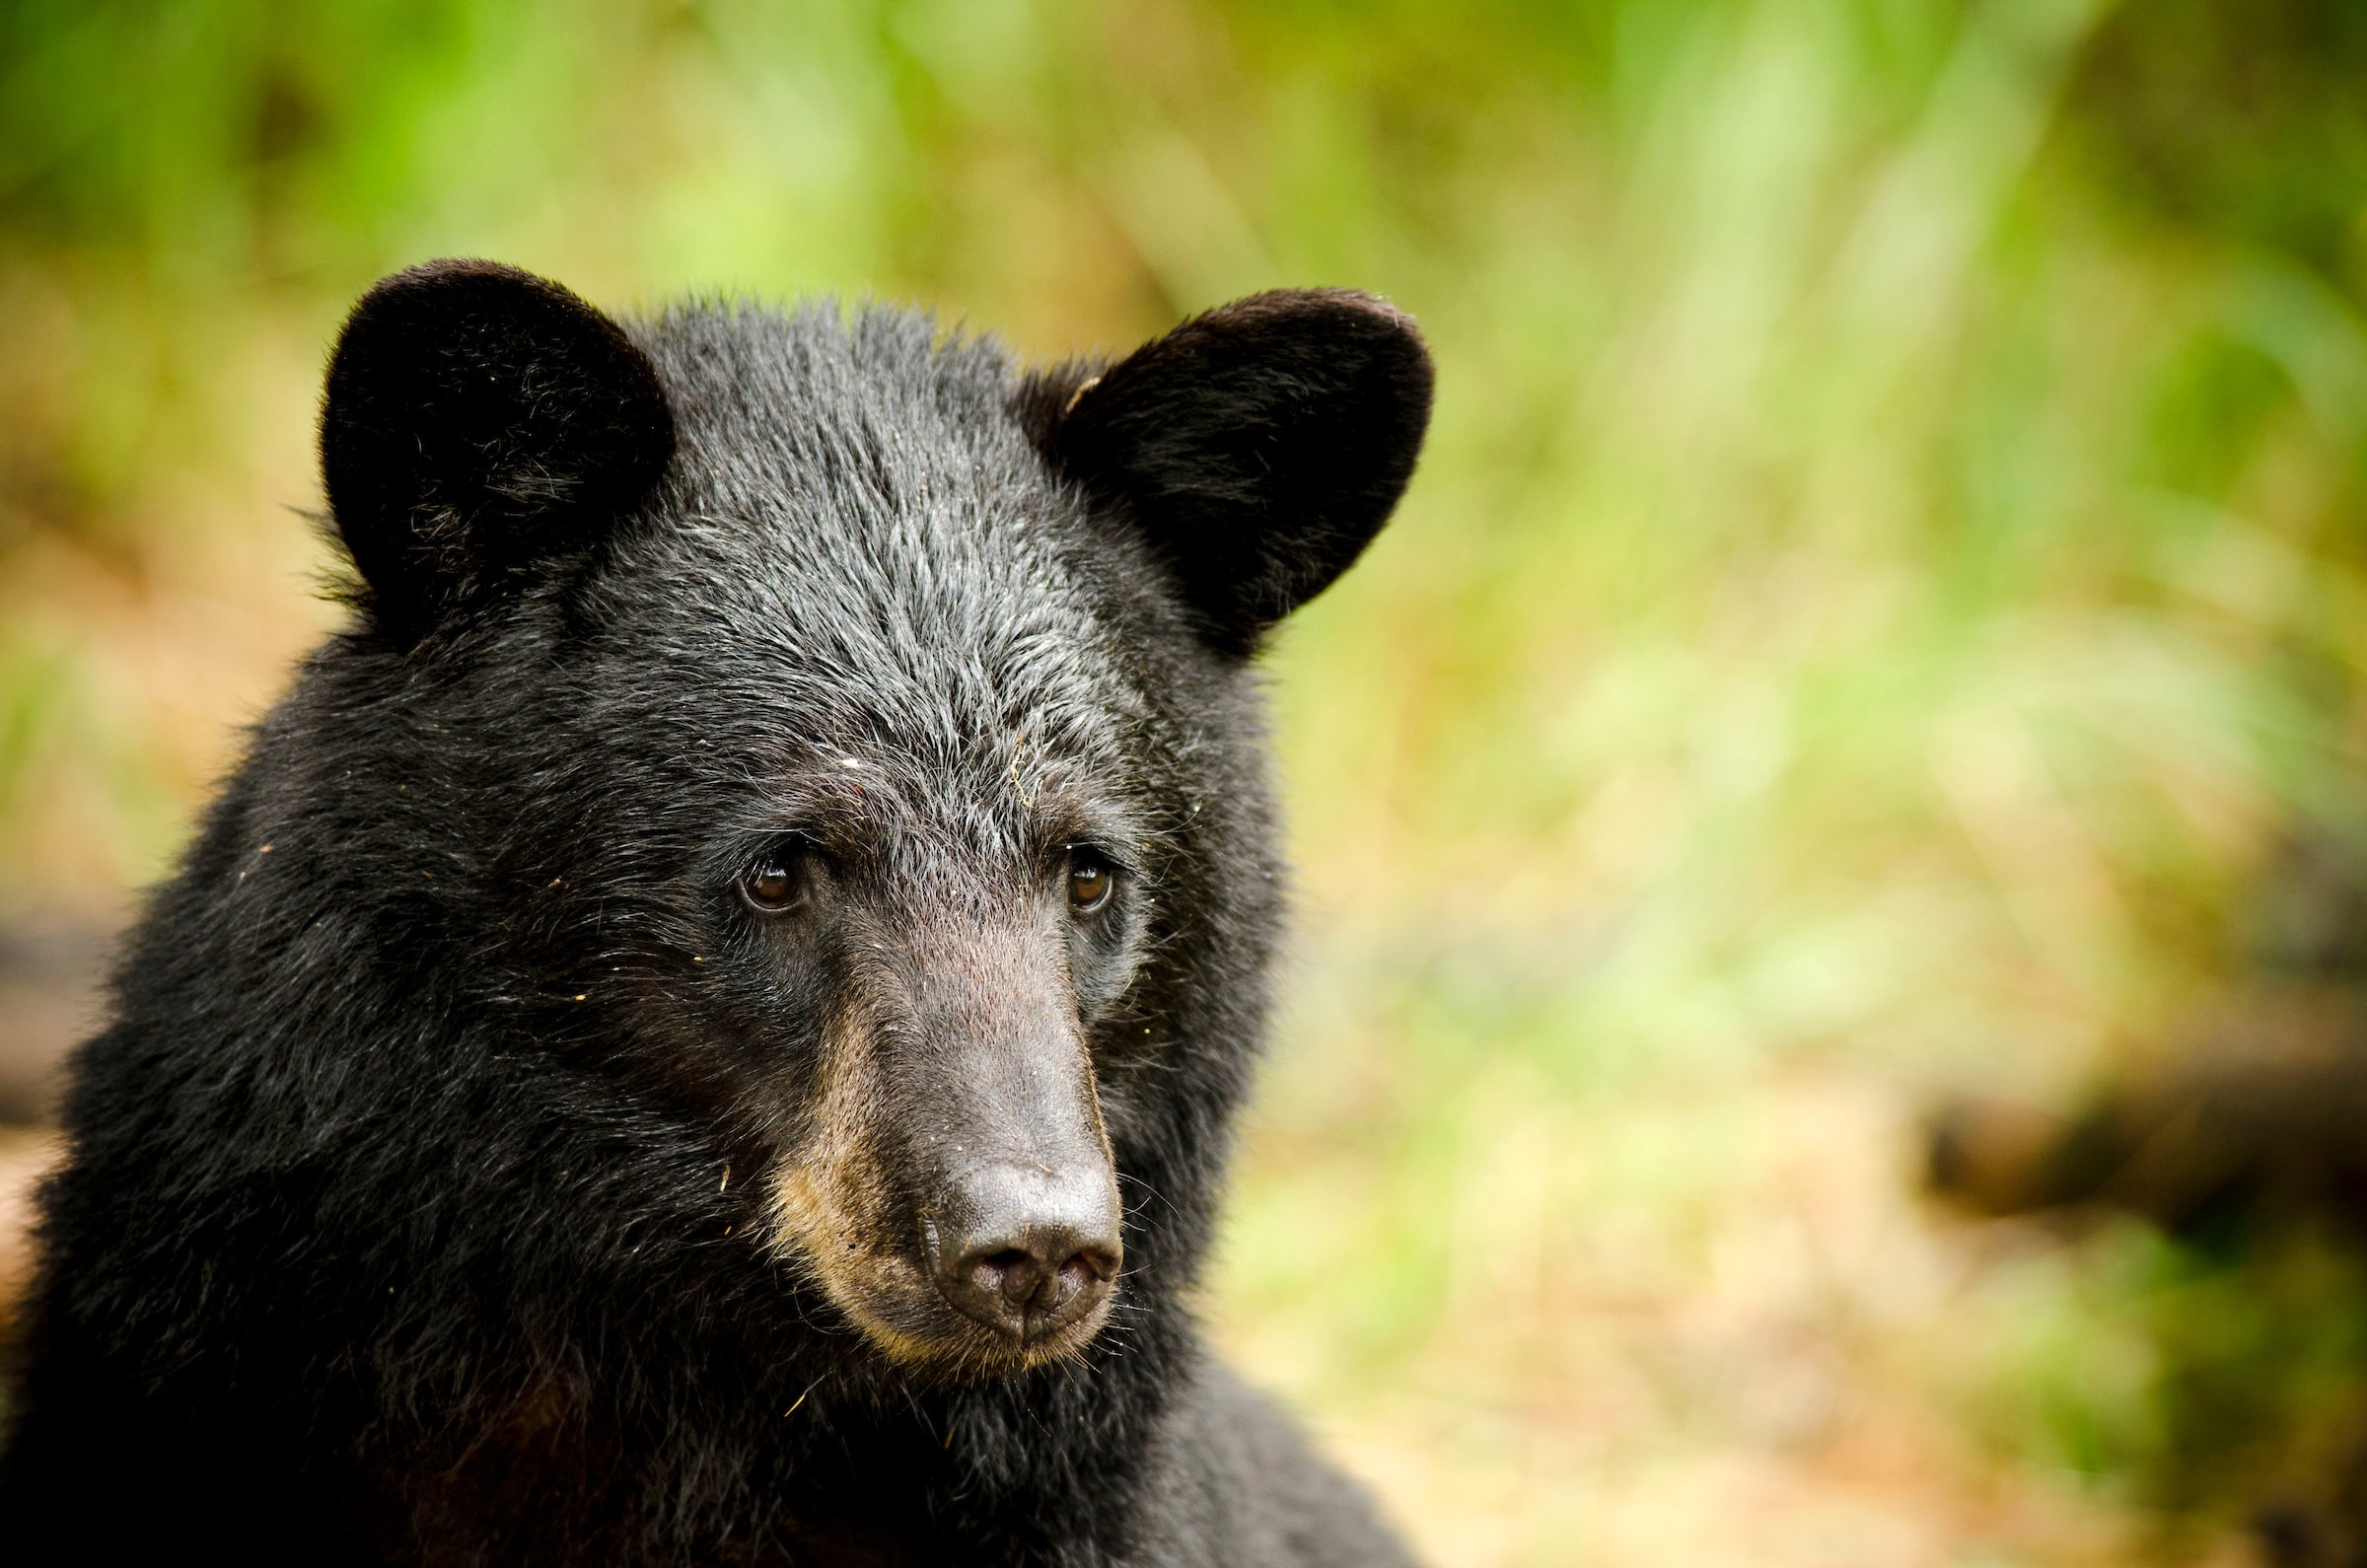 Spring bear hunting has a rich heritage full of exciting traditions.